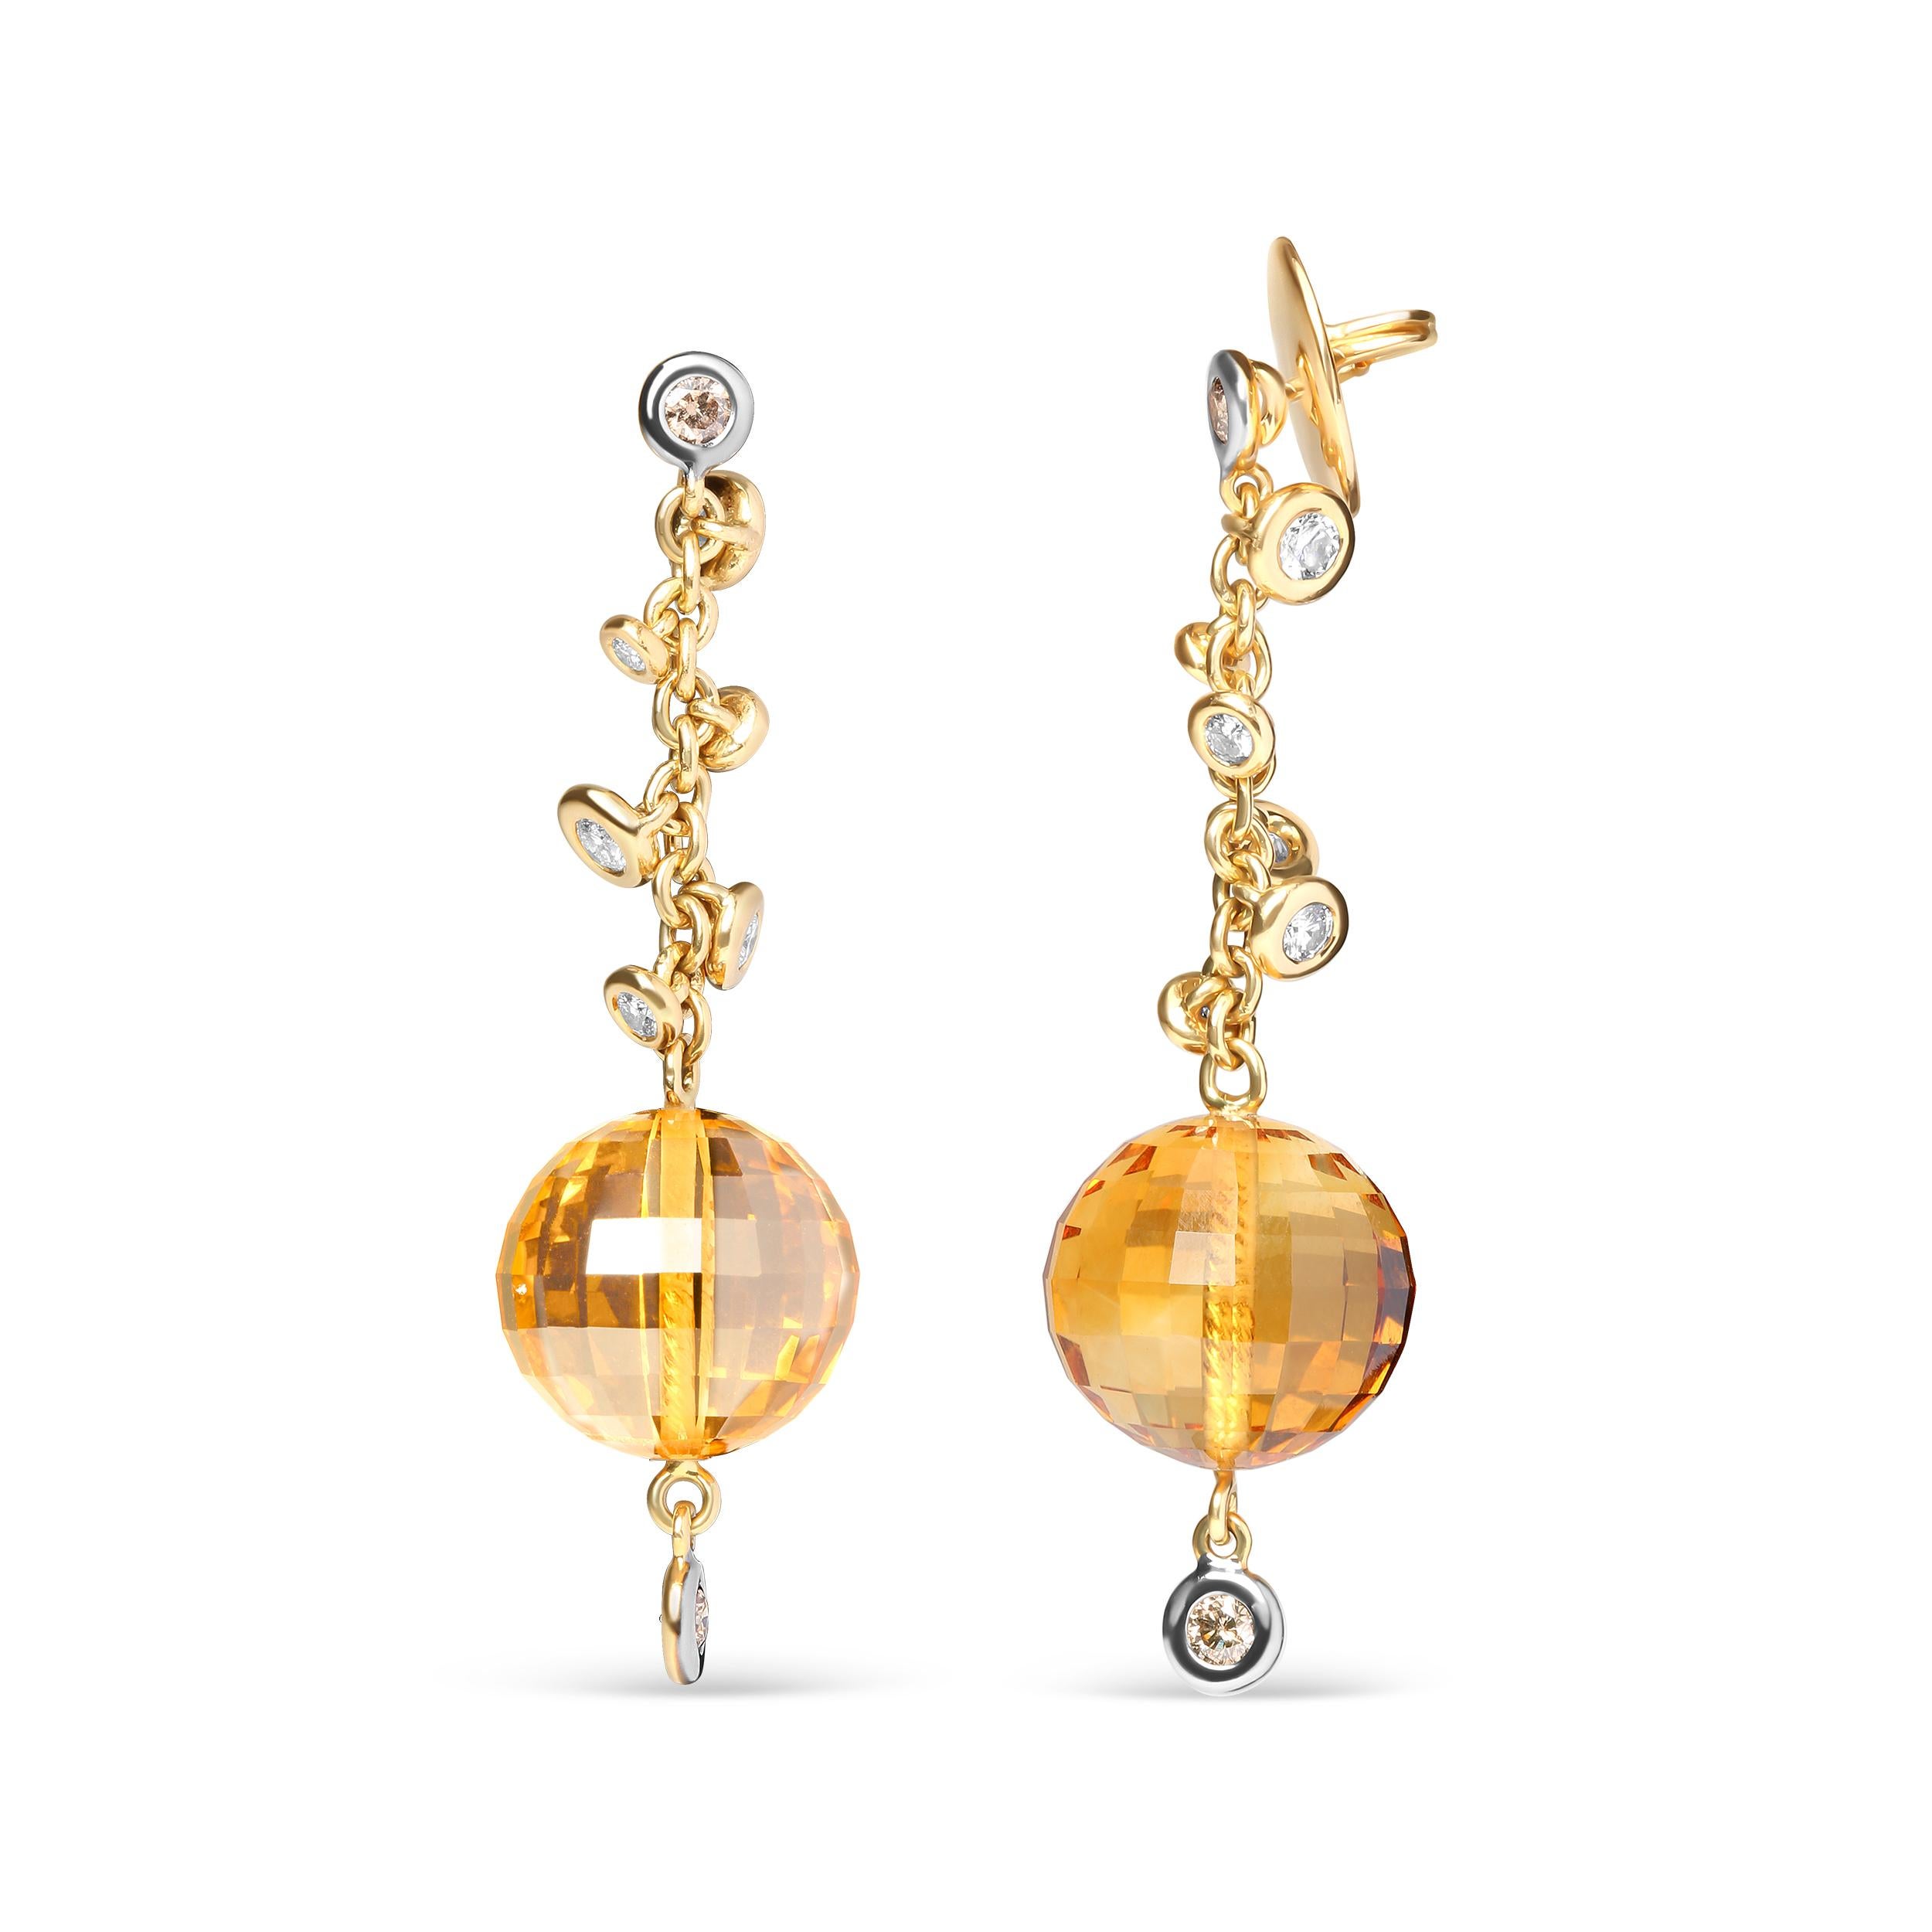 These 18k yellow gold dangle earrings possess a great movement that twinkles in the light as you move about and flash your style. Stationed at the top of the upper dangle and at the very bottom are two round heat-treated brown diamonds within secure